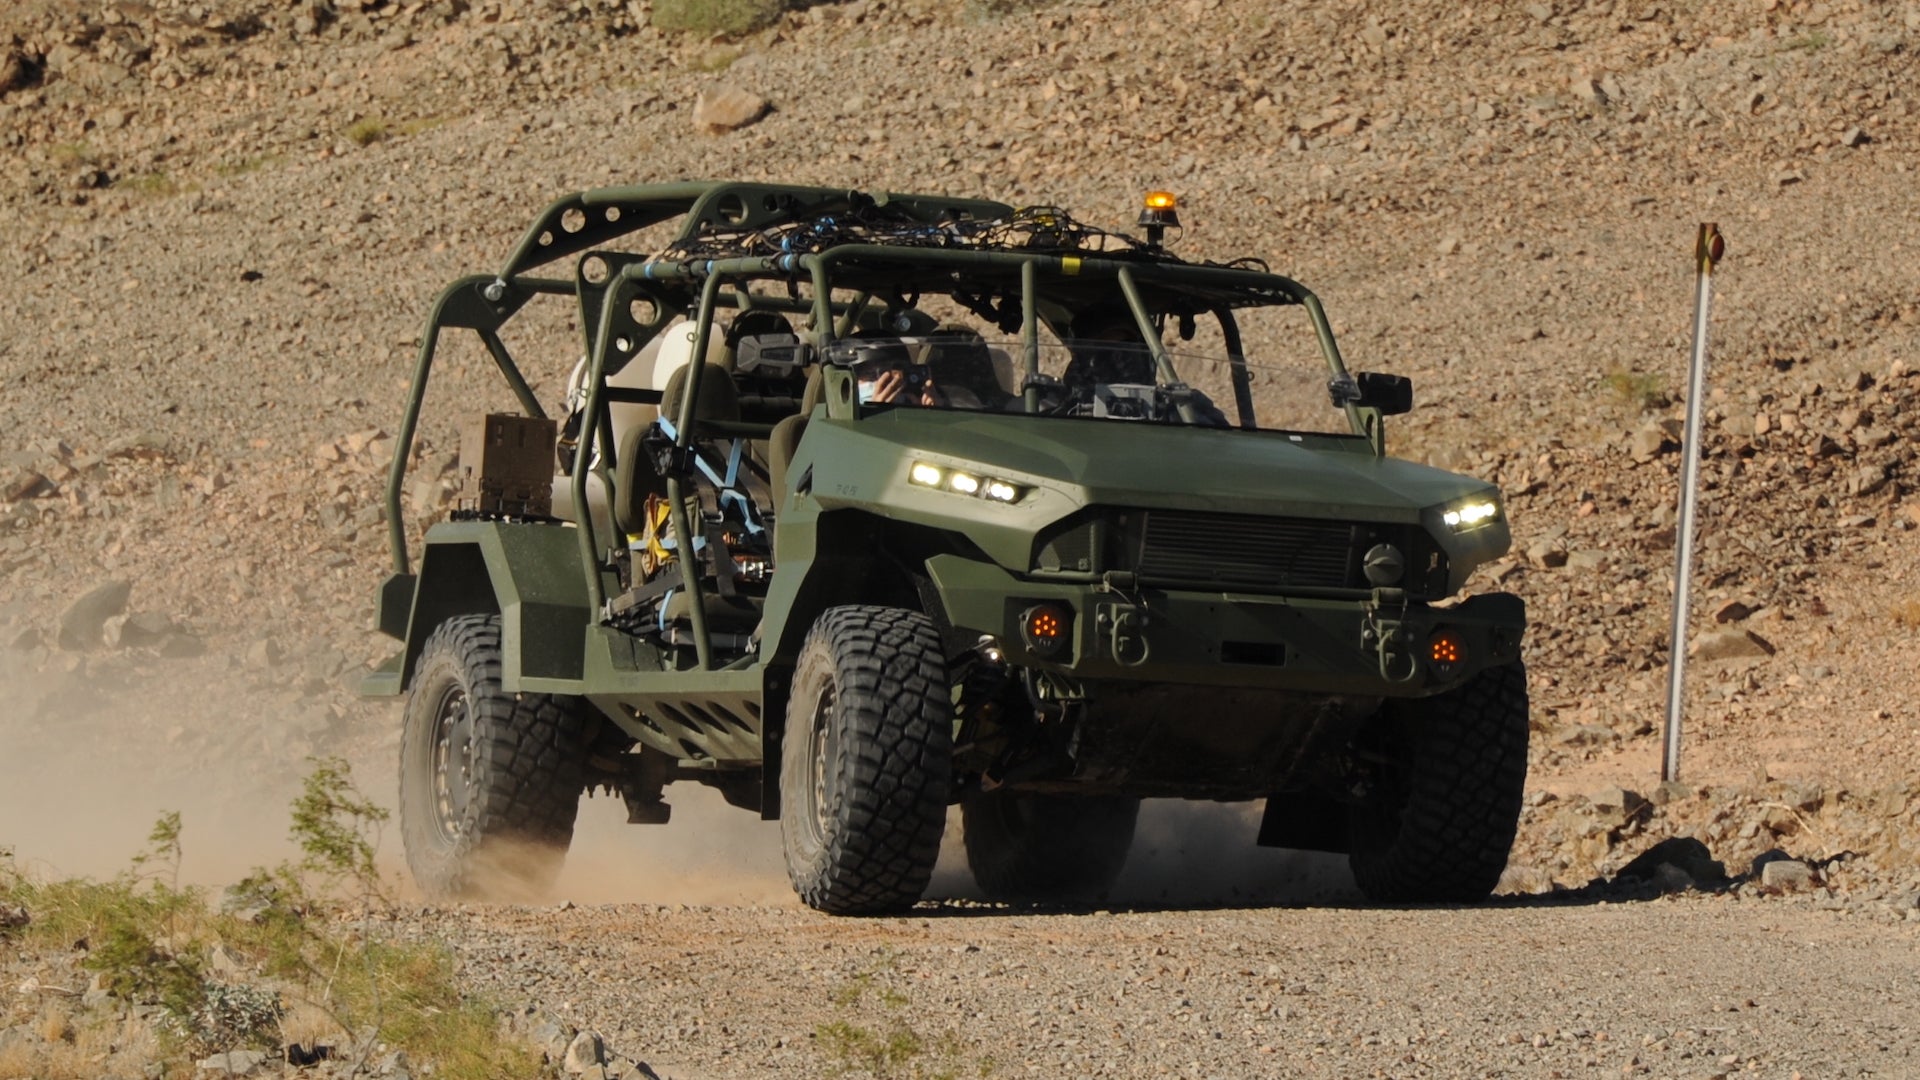 Army Infantry Squad Vehicle tested at U.S. Army Yuma Proving Ground